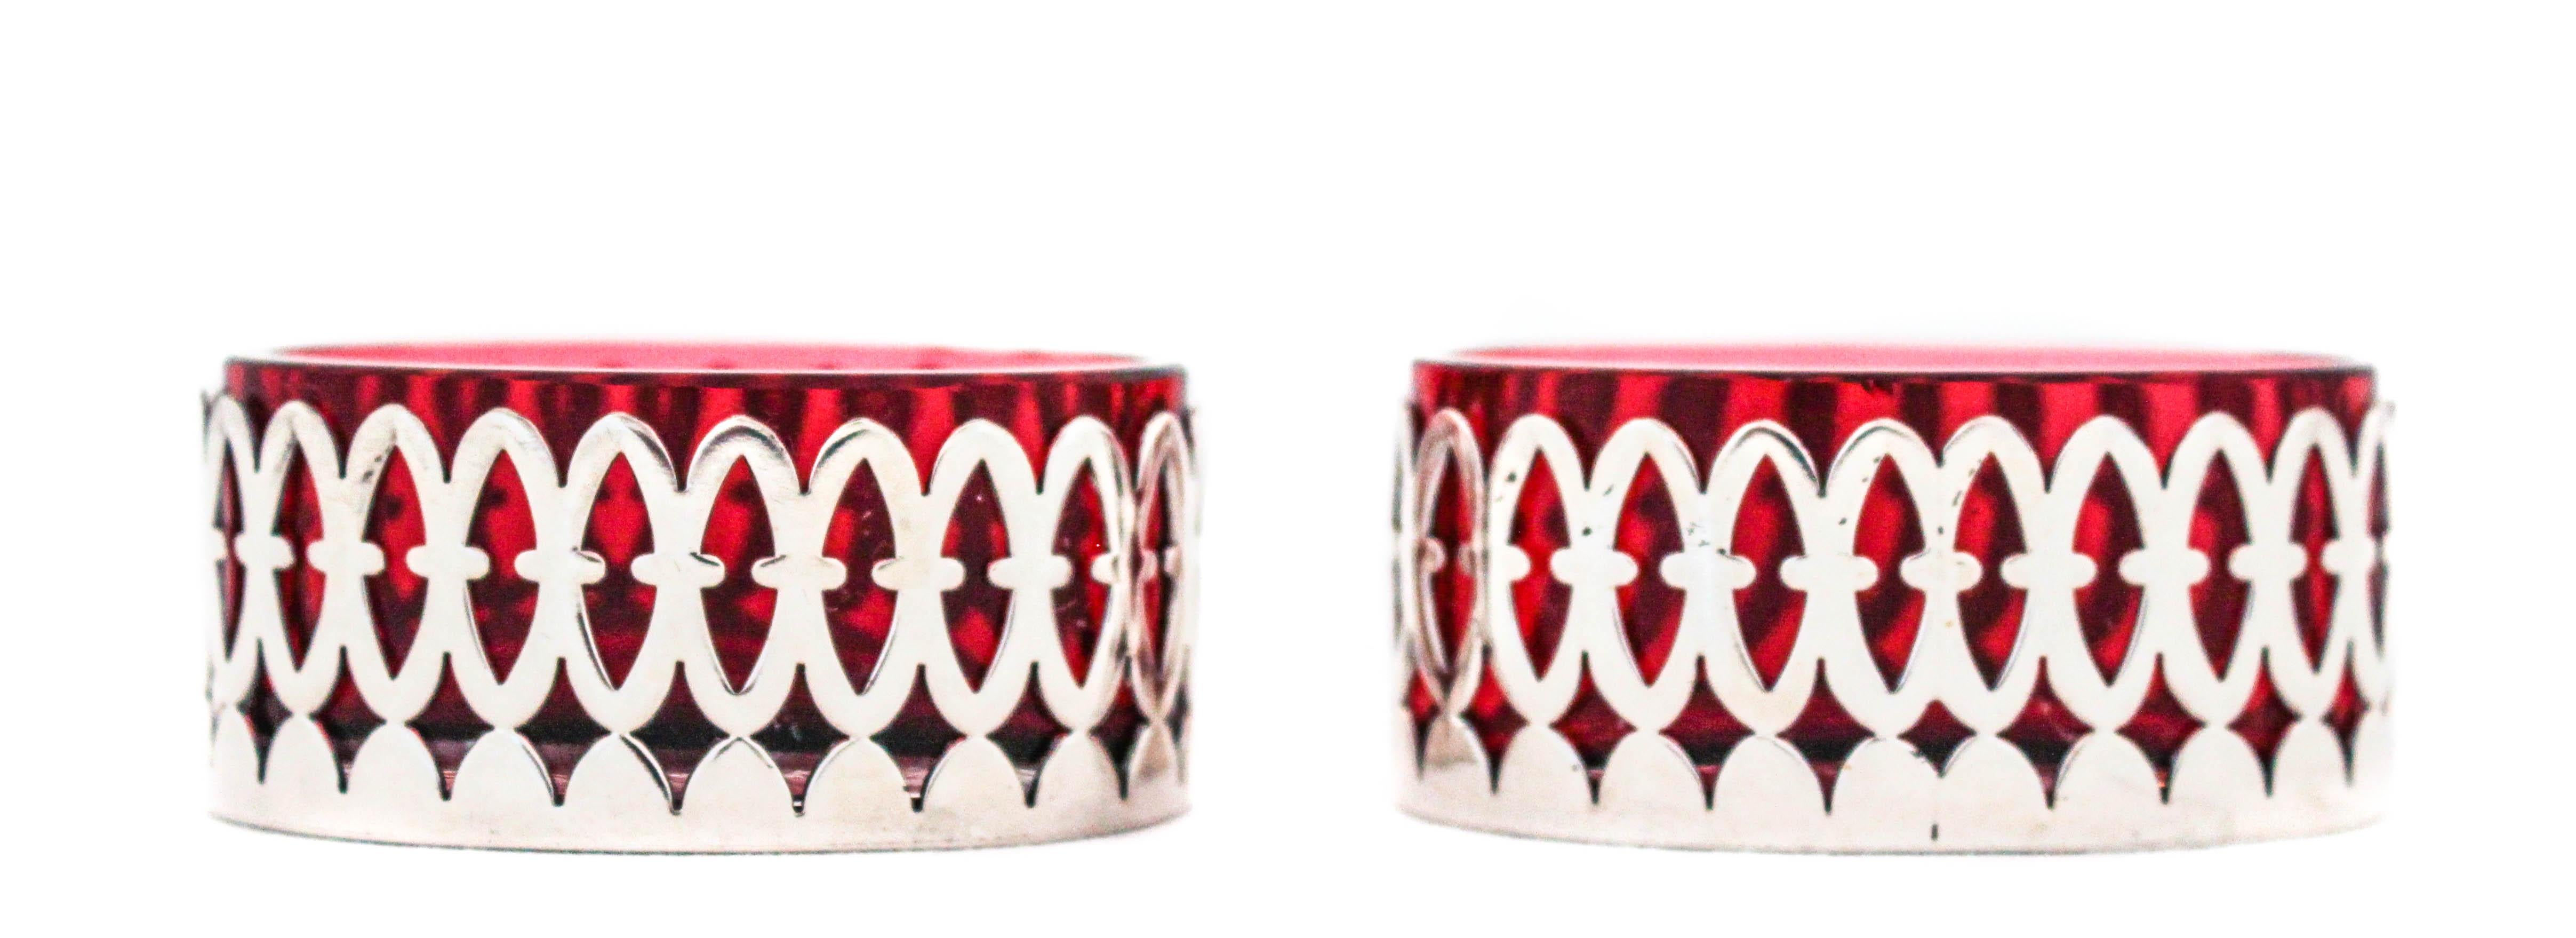 We are delighted to offer you this pair of Art Deco sterling silver salt cellars from the 1920s. Not only is it rare to find a pair of salt cellars but the Ruby red color and oval shape make this pair a triple-win!! The sterling silver encasement is